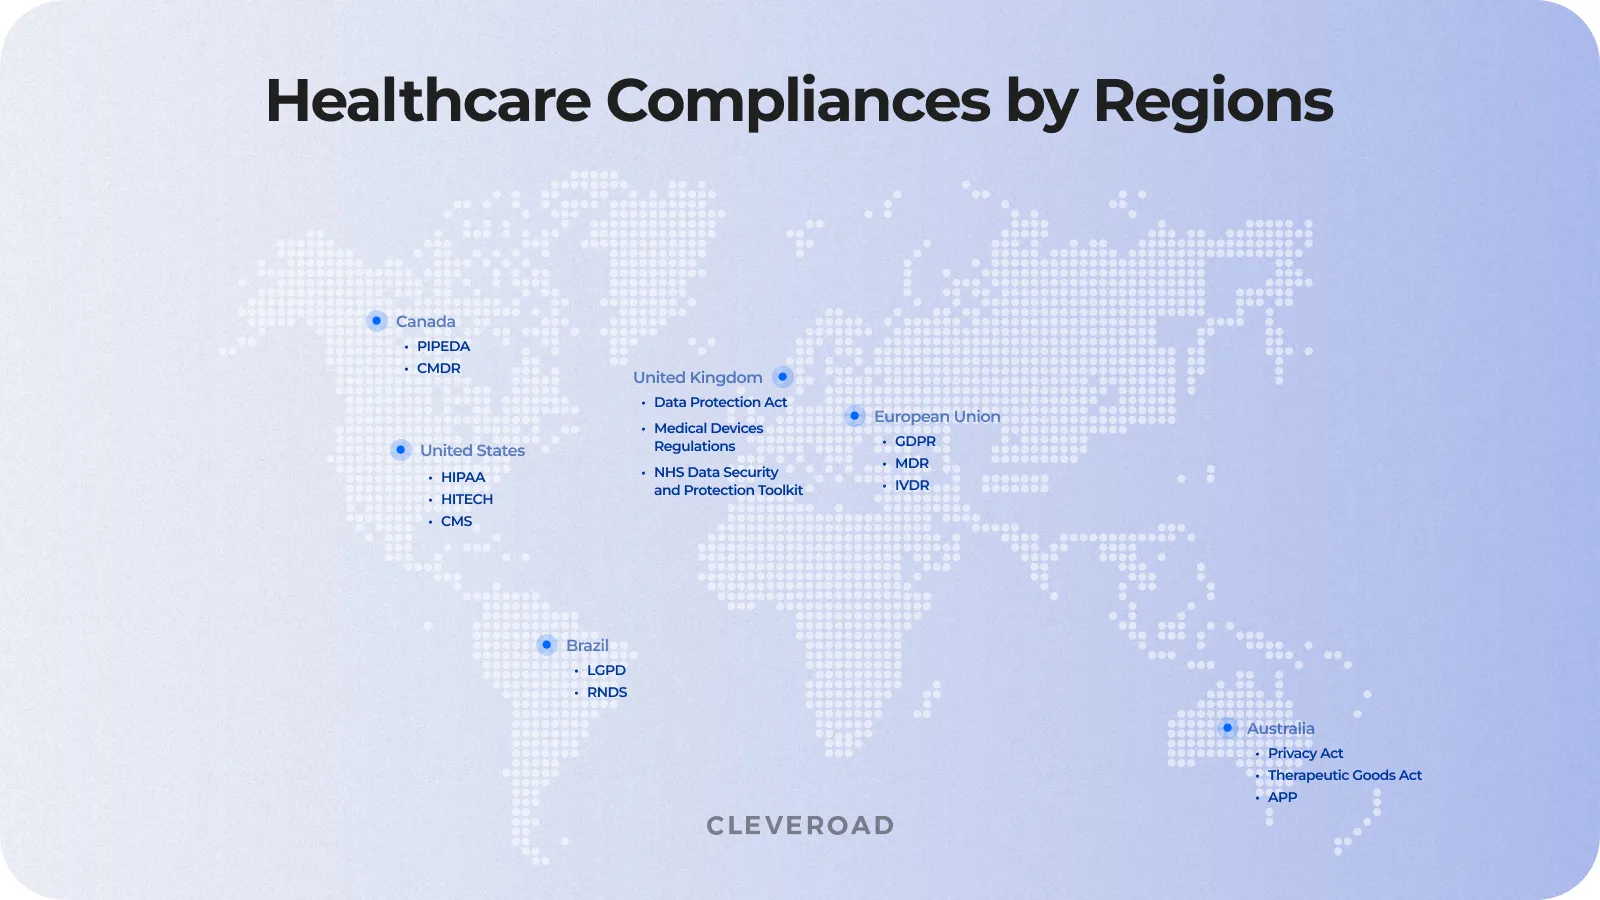 Healthcare compliances in different countries